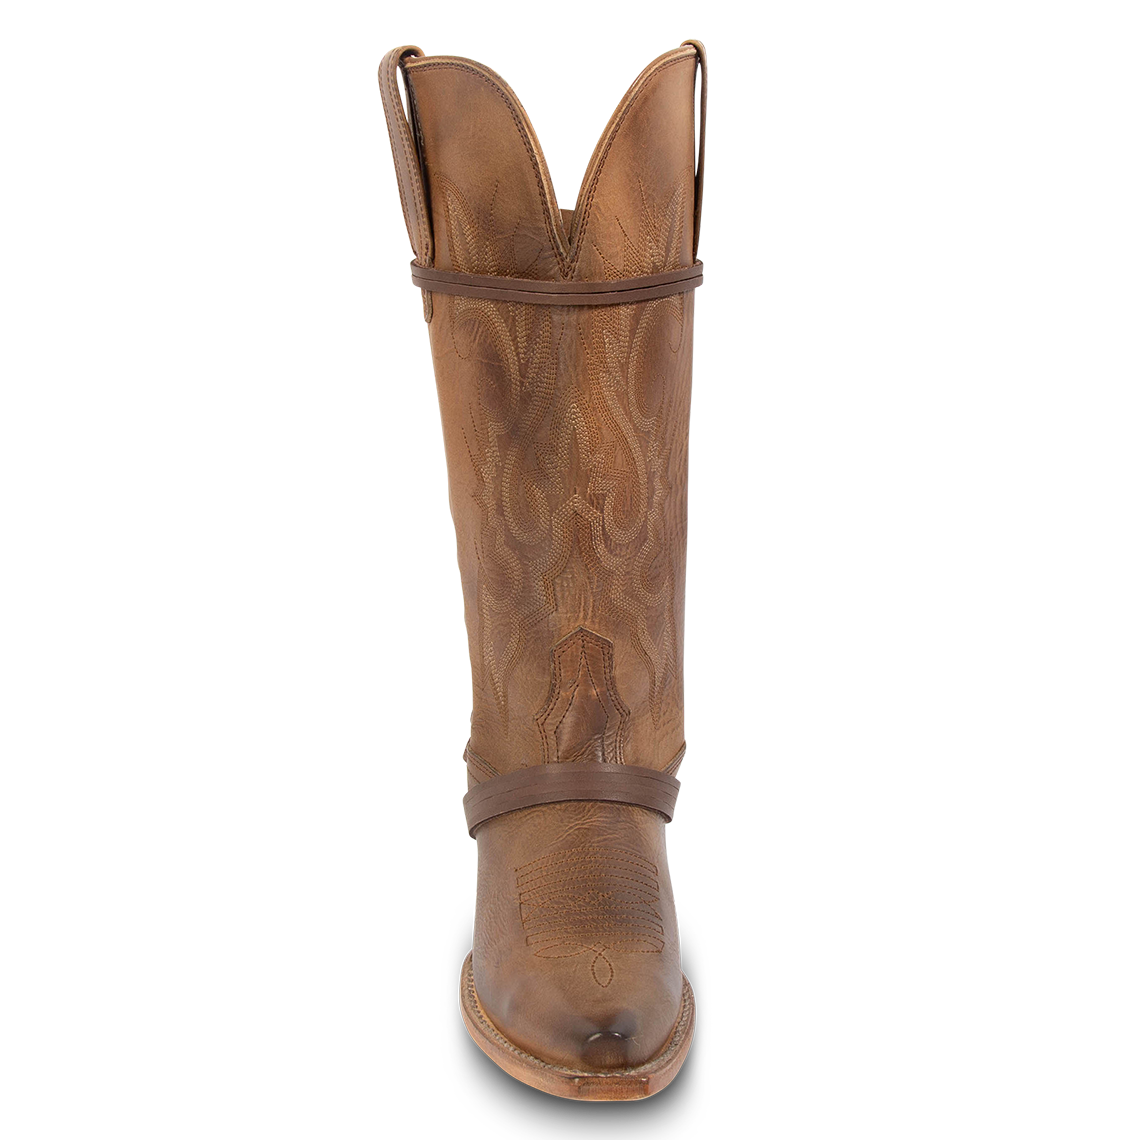 Front view showing western stitch detailing and wrapped leather laces on FREEBIRD women's Wardon tan cowboy boot with back lace panel